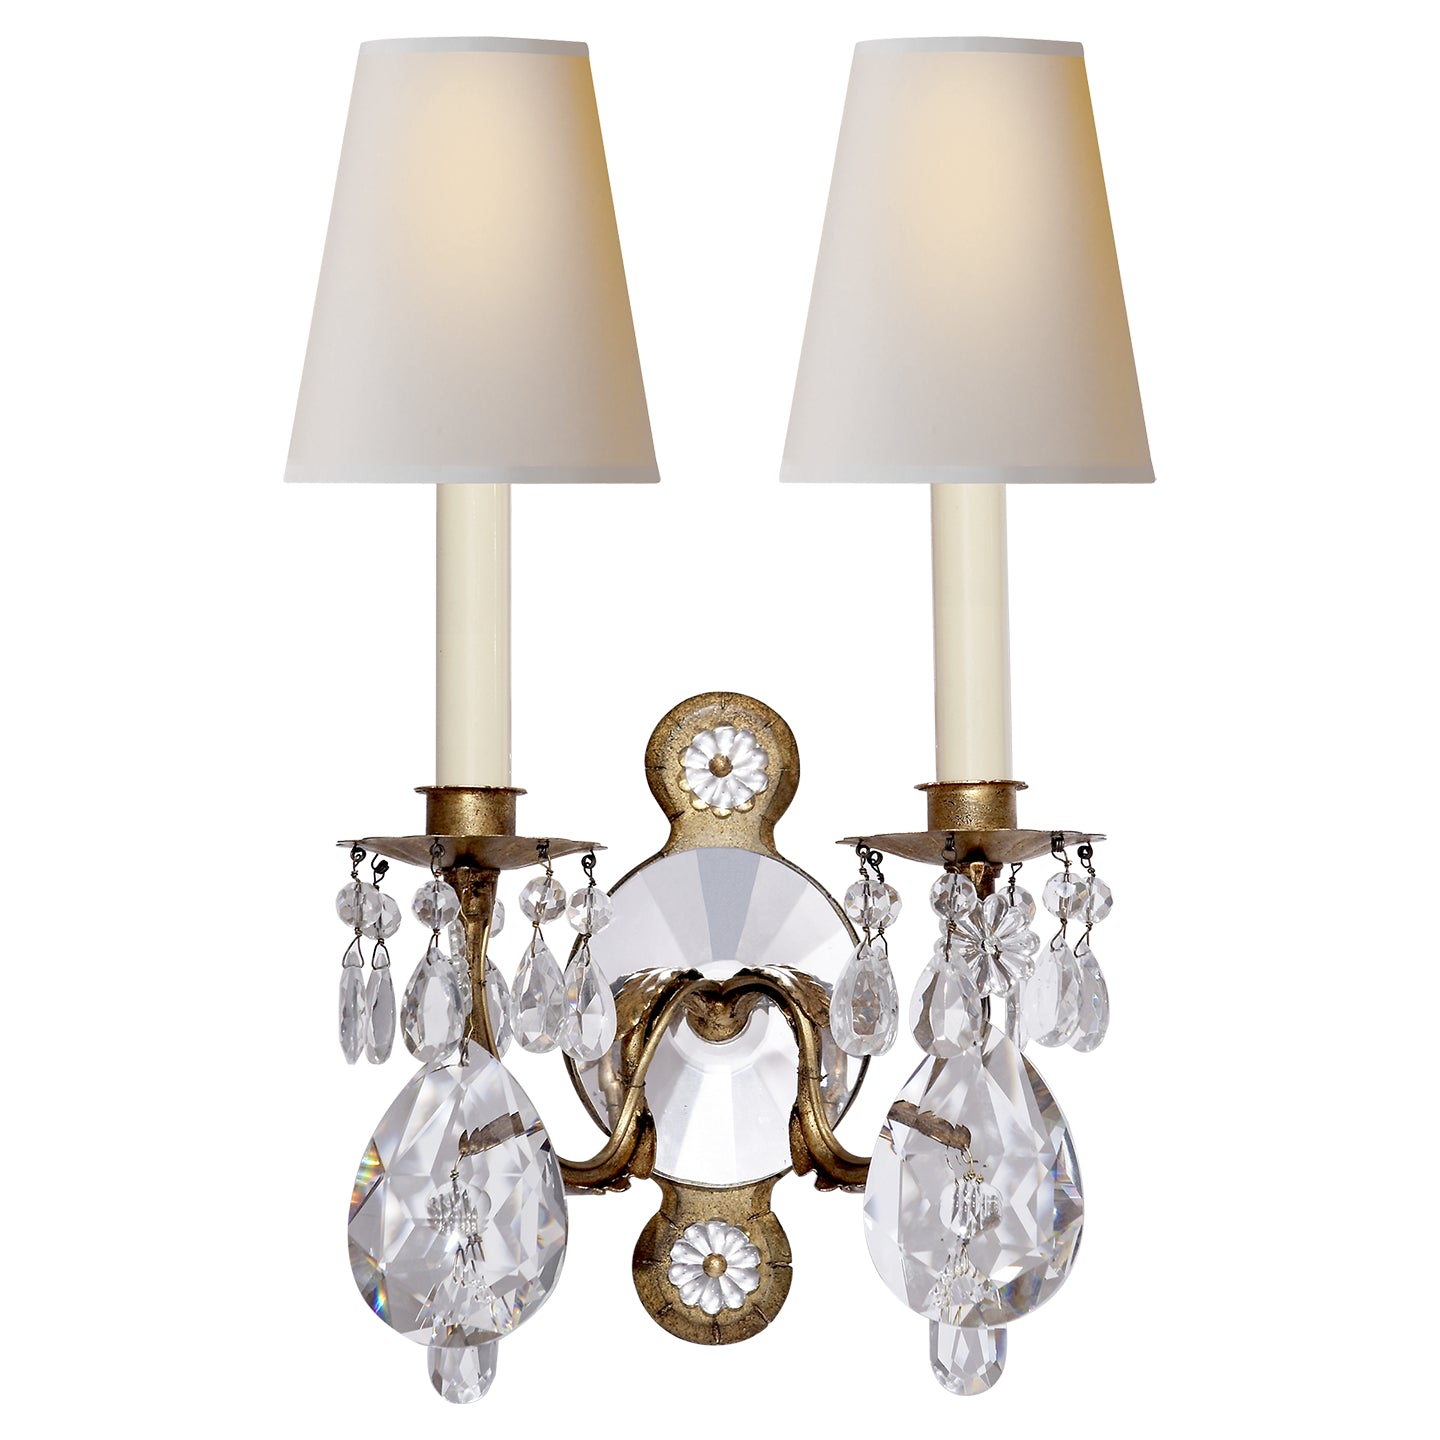 Load image into Gallery viewer, Visual Comfort Signature - TOB 2471GI/CG-PL - Two Light Wall Sconce - Yves - Gilded Iron and Crystal
